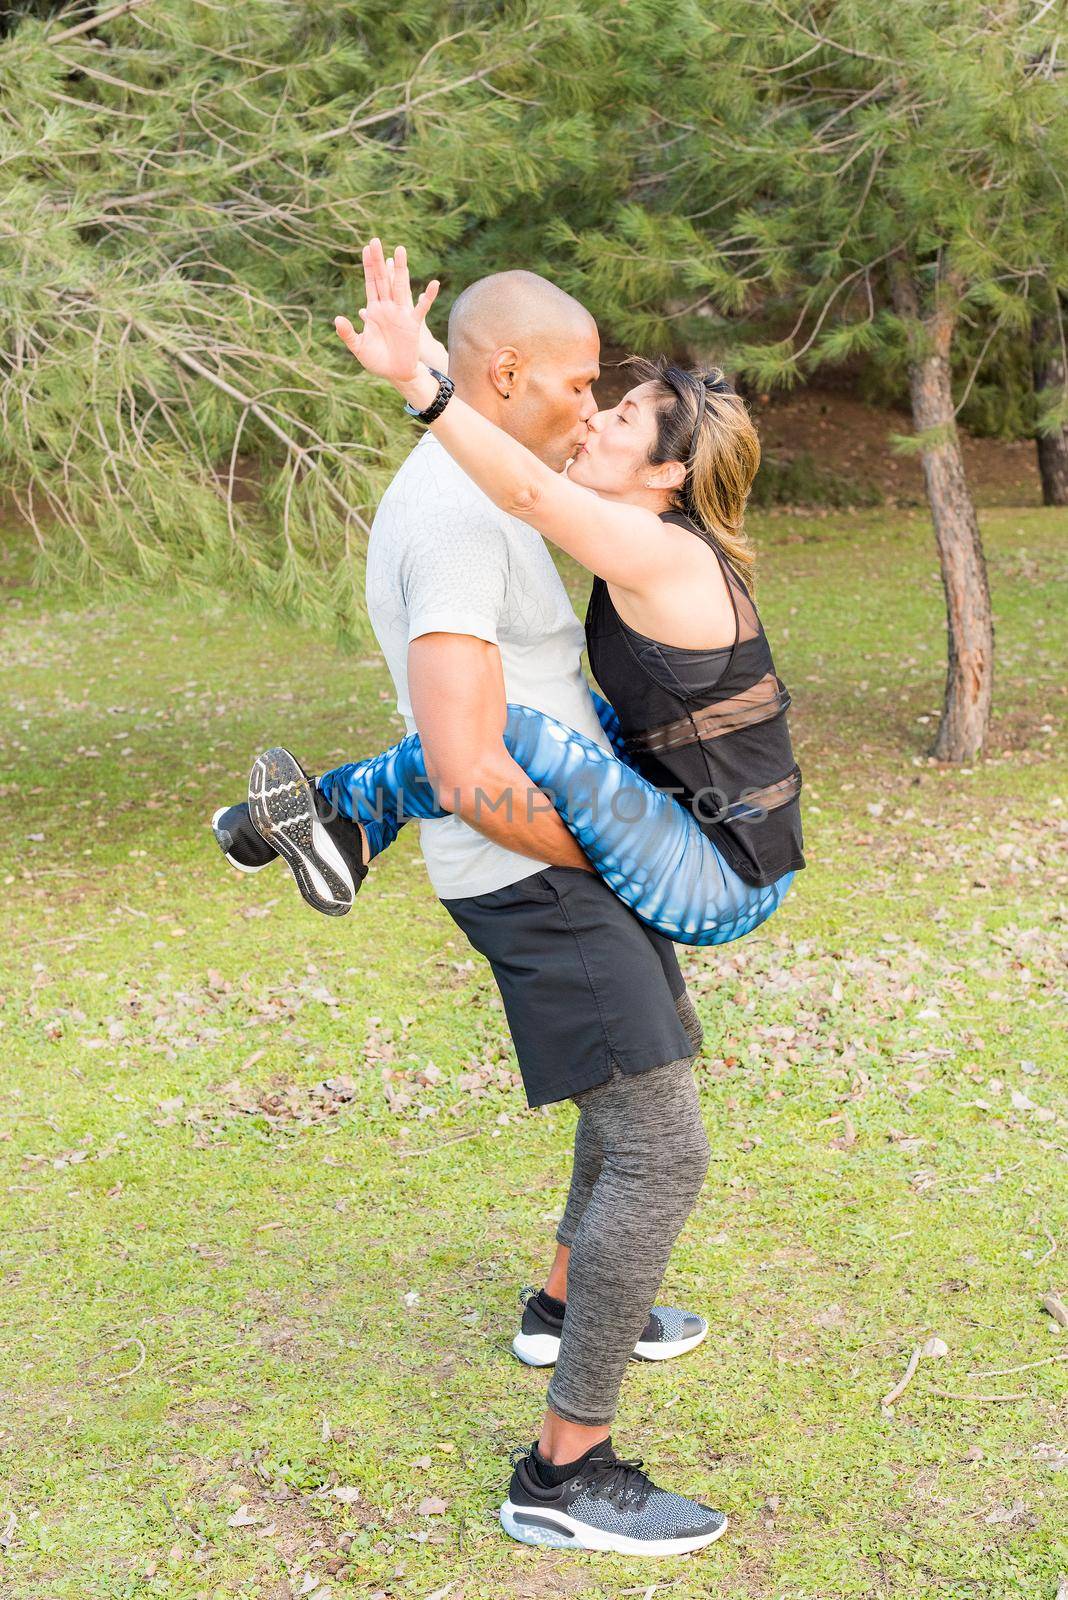 Fitness couple doing abdominal excersise while he holding she for her legs and kissing each other. Couple doing exercise outdoors together.